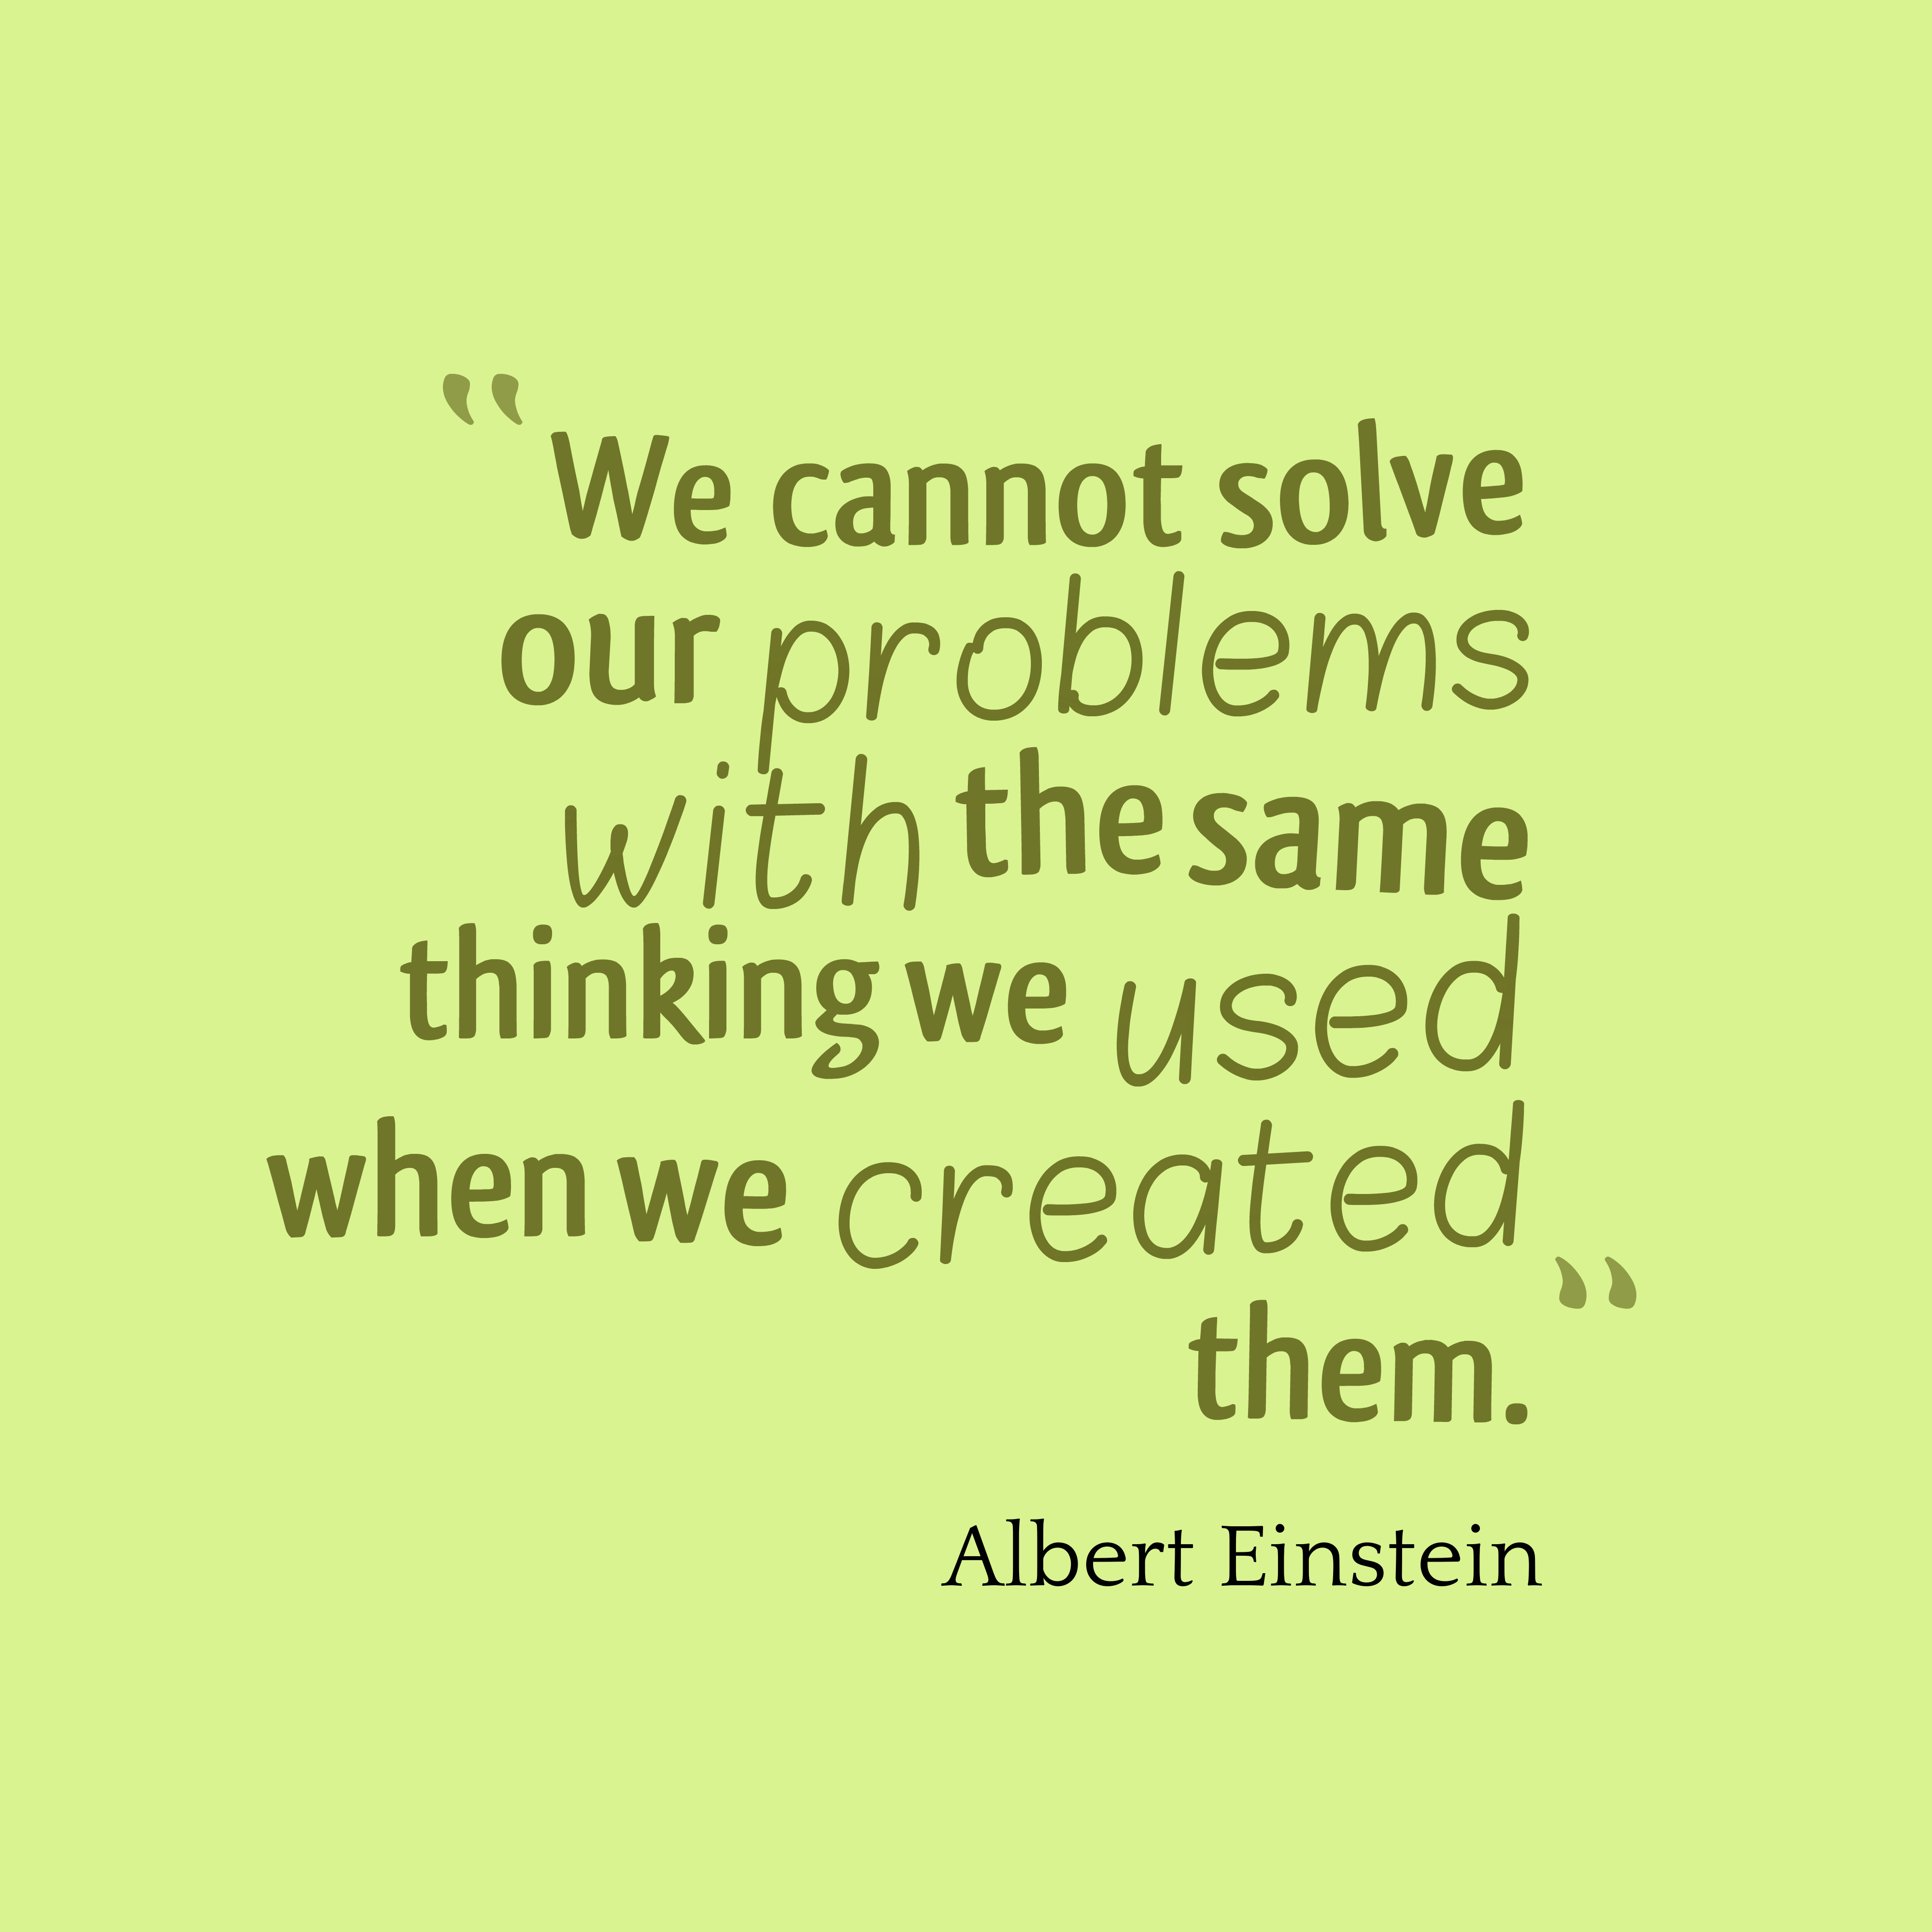 We cannot solve our problems with the same thinking we used when we created them. Albert Einstein